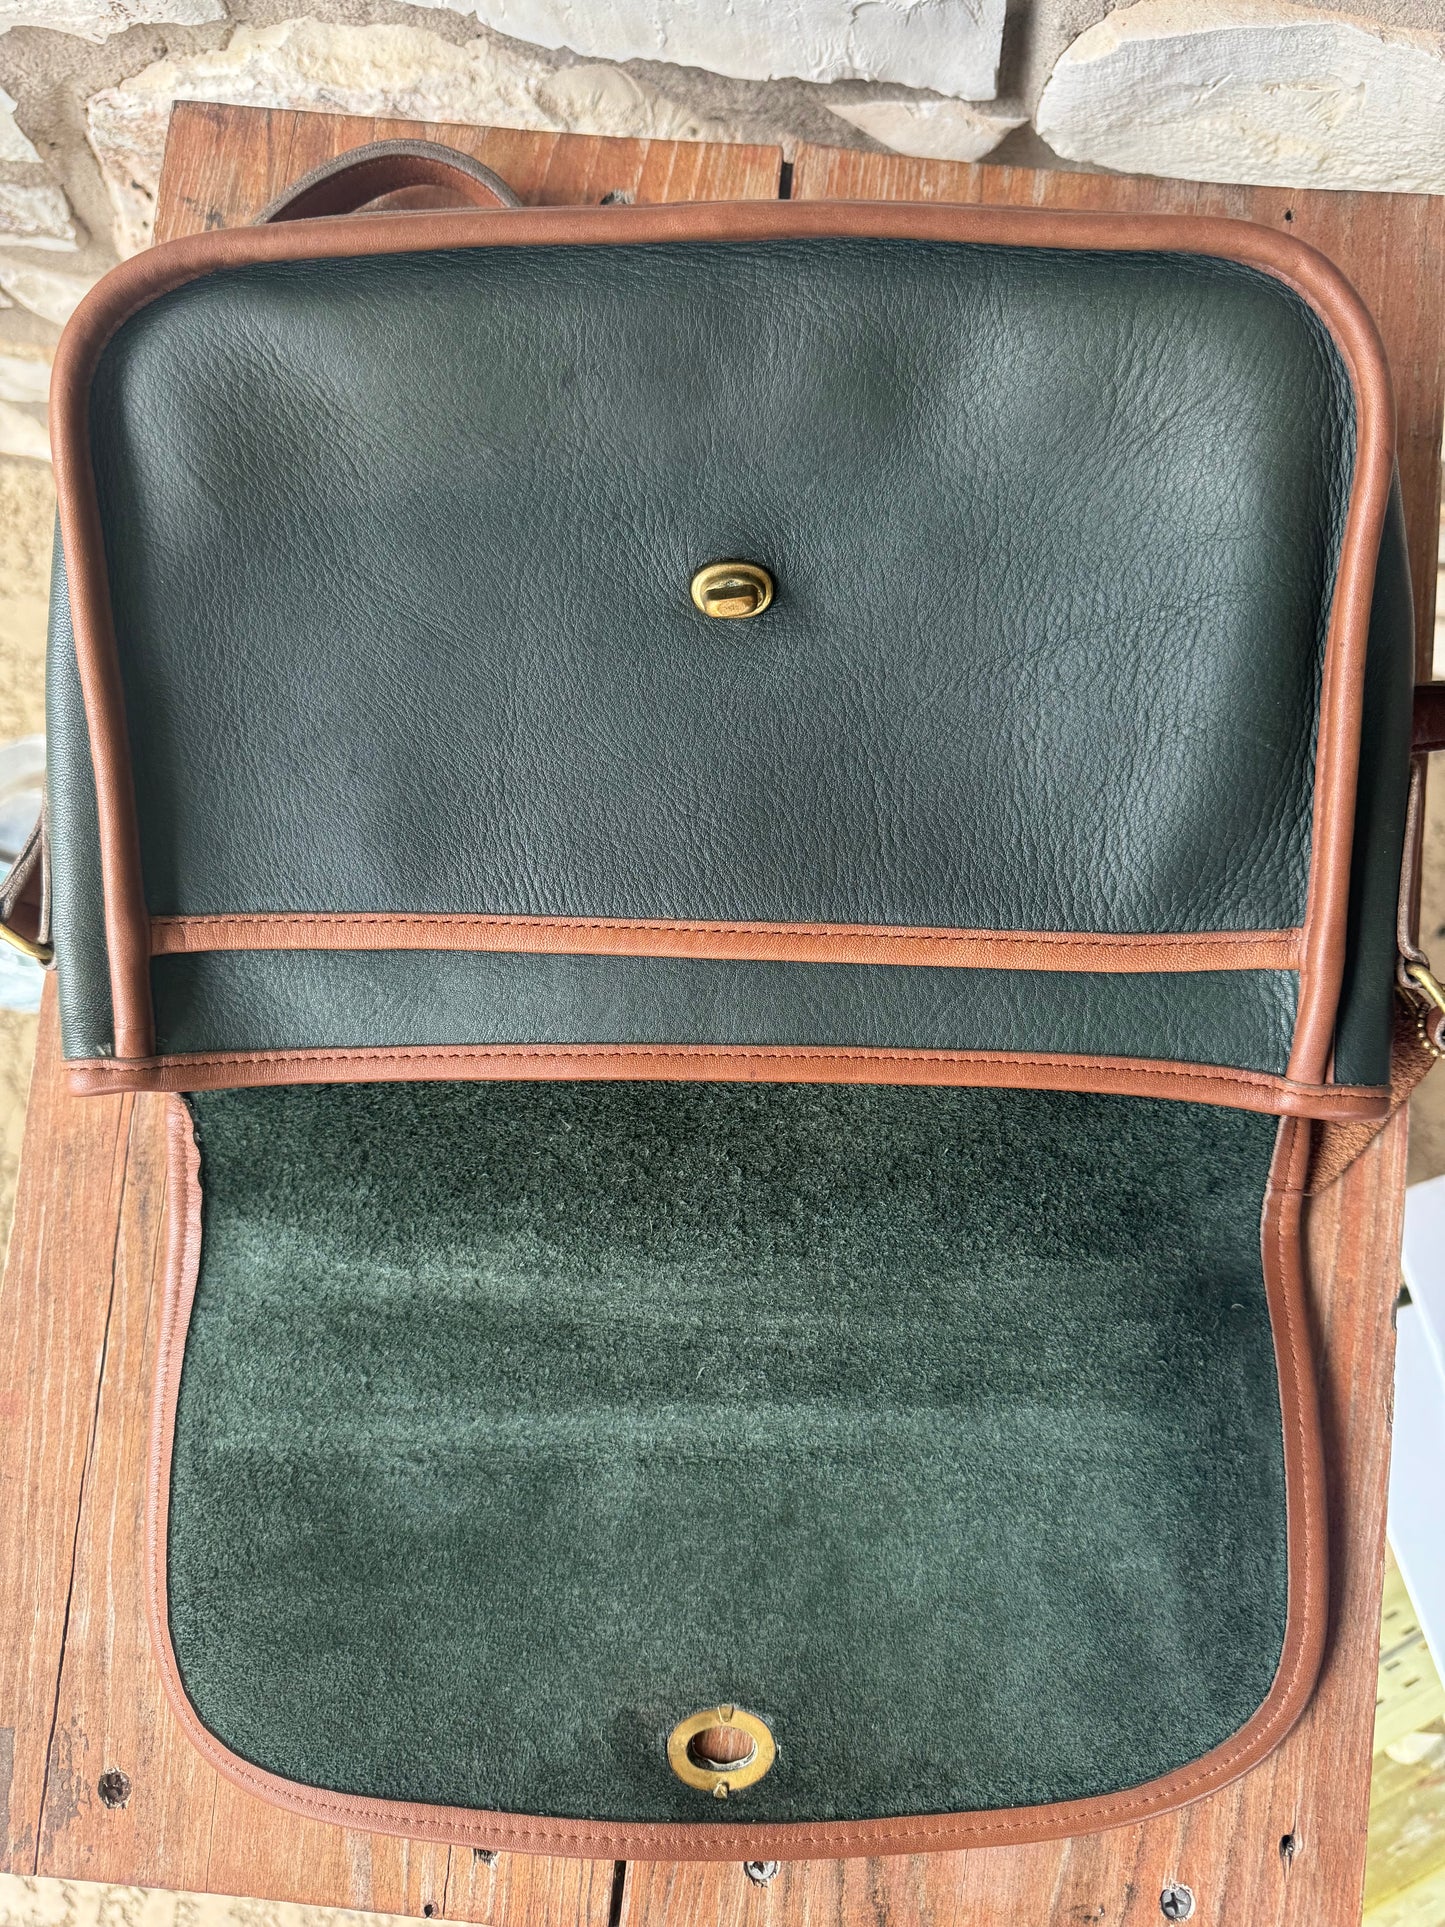 Vintage Coach Spectator City Bag- Forest Green & Tabac w/Hangtag